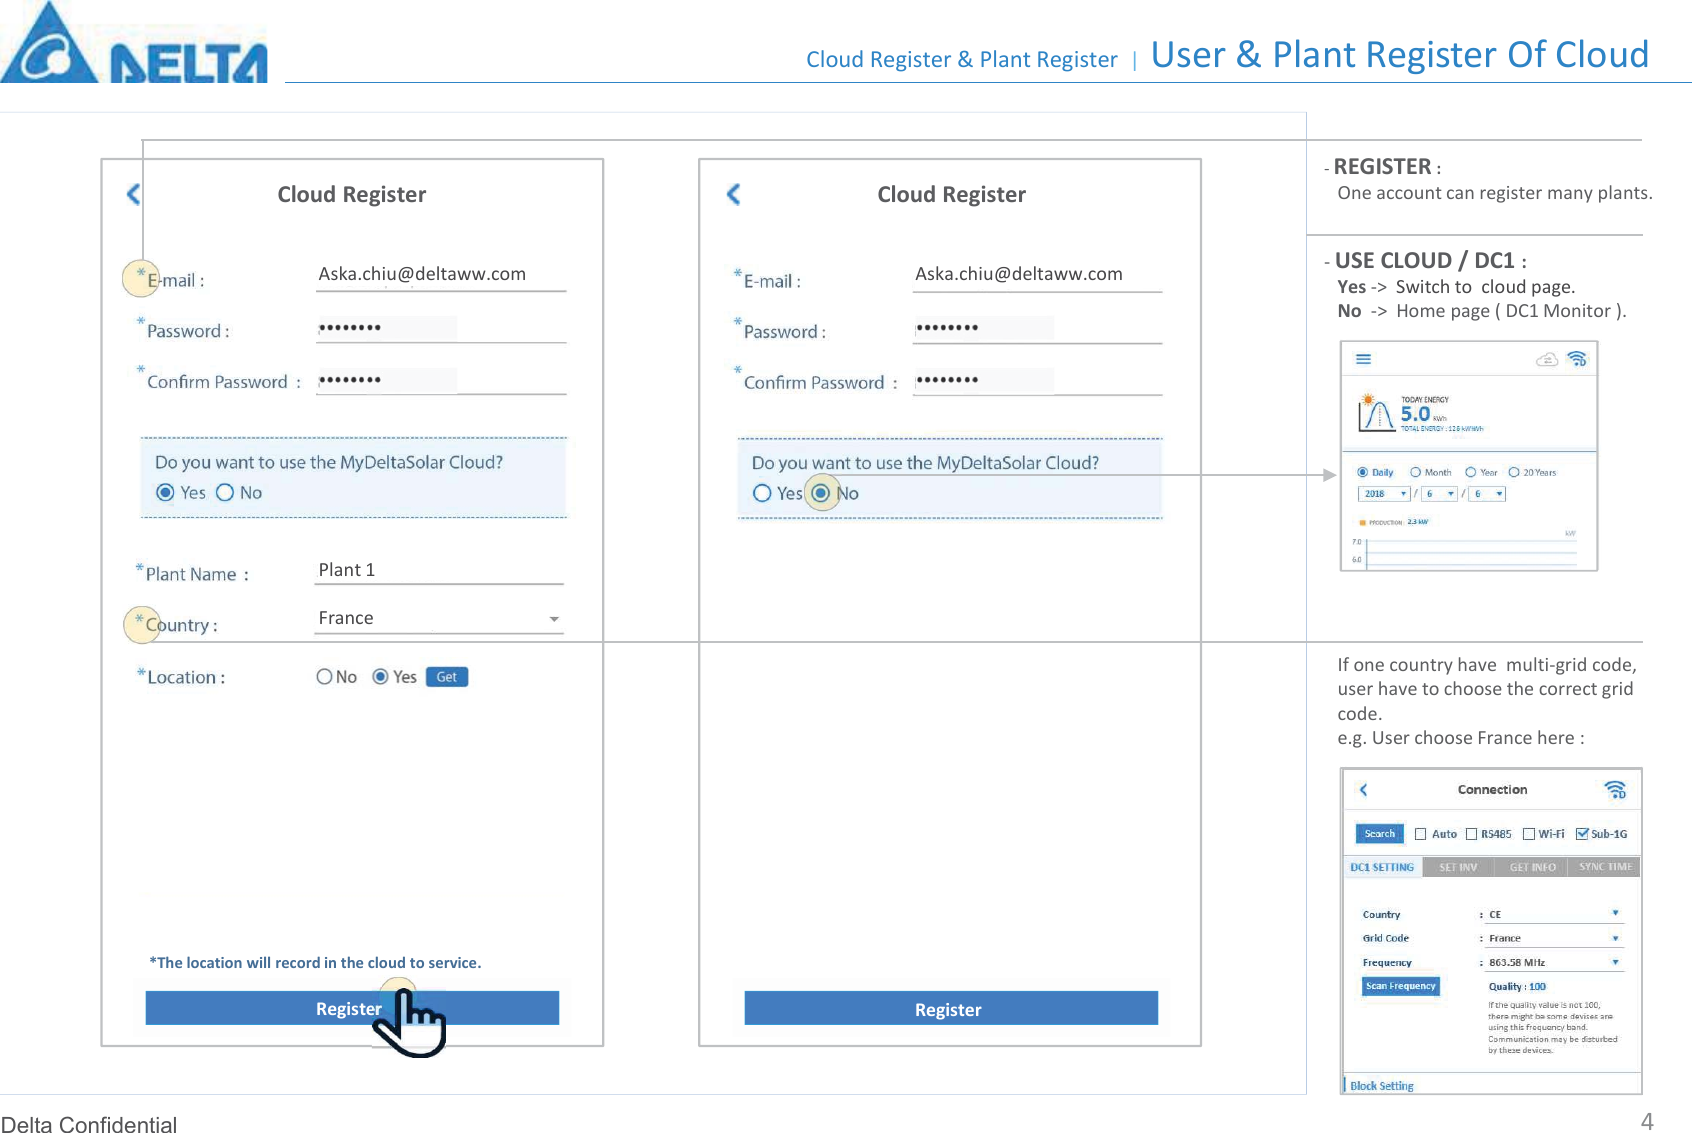 Delta ConfidentialCloud Register &amp; Plant Register |-REGISTER :One account can register many plants.-USE CLOUD / DC1 :Yes -&gt;  Switch to  cloud page.No  -&gt;  Home page ( DC1 Monitor ).Cloud Register Cloud Register4User &amp; Plant Register Of CloudAska.chiu@deltaww.comRegister Register*The location will record in the cloud to service.Plant 1FranceIf one country have  multi-grid code,user have to choose the correct gridcode.e.g. User choose France here :Aska.chiu@deltaww.com